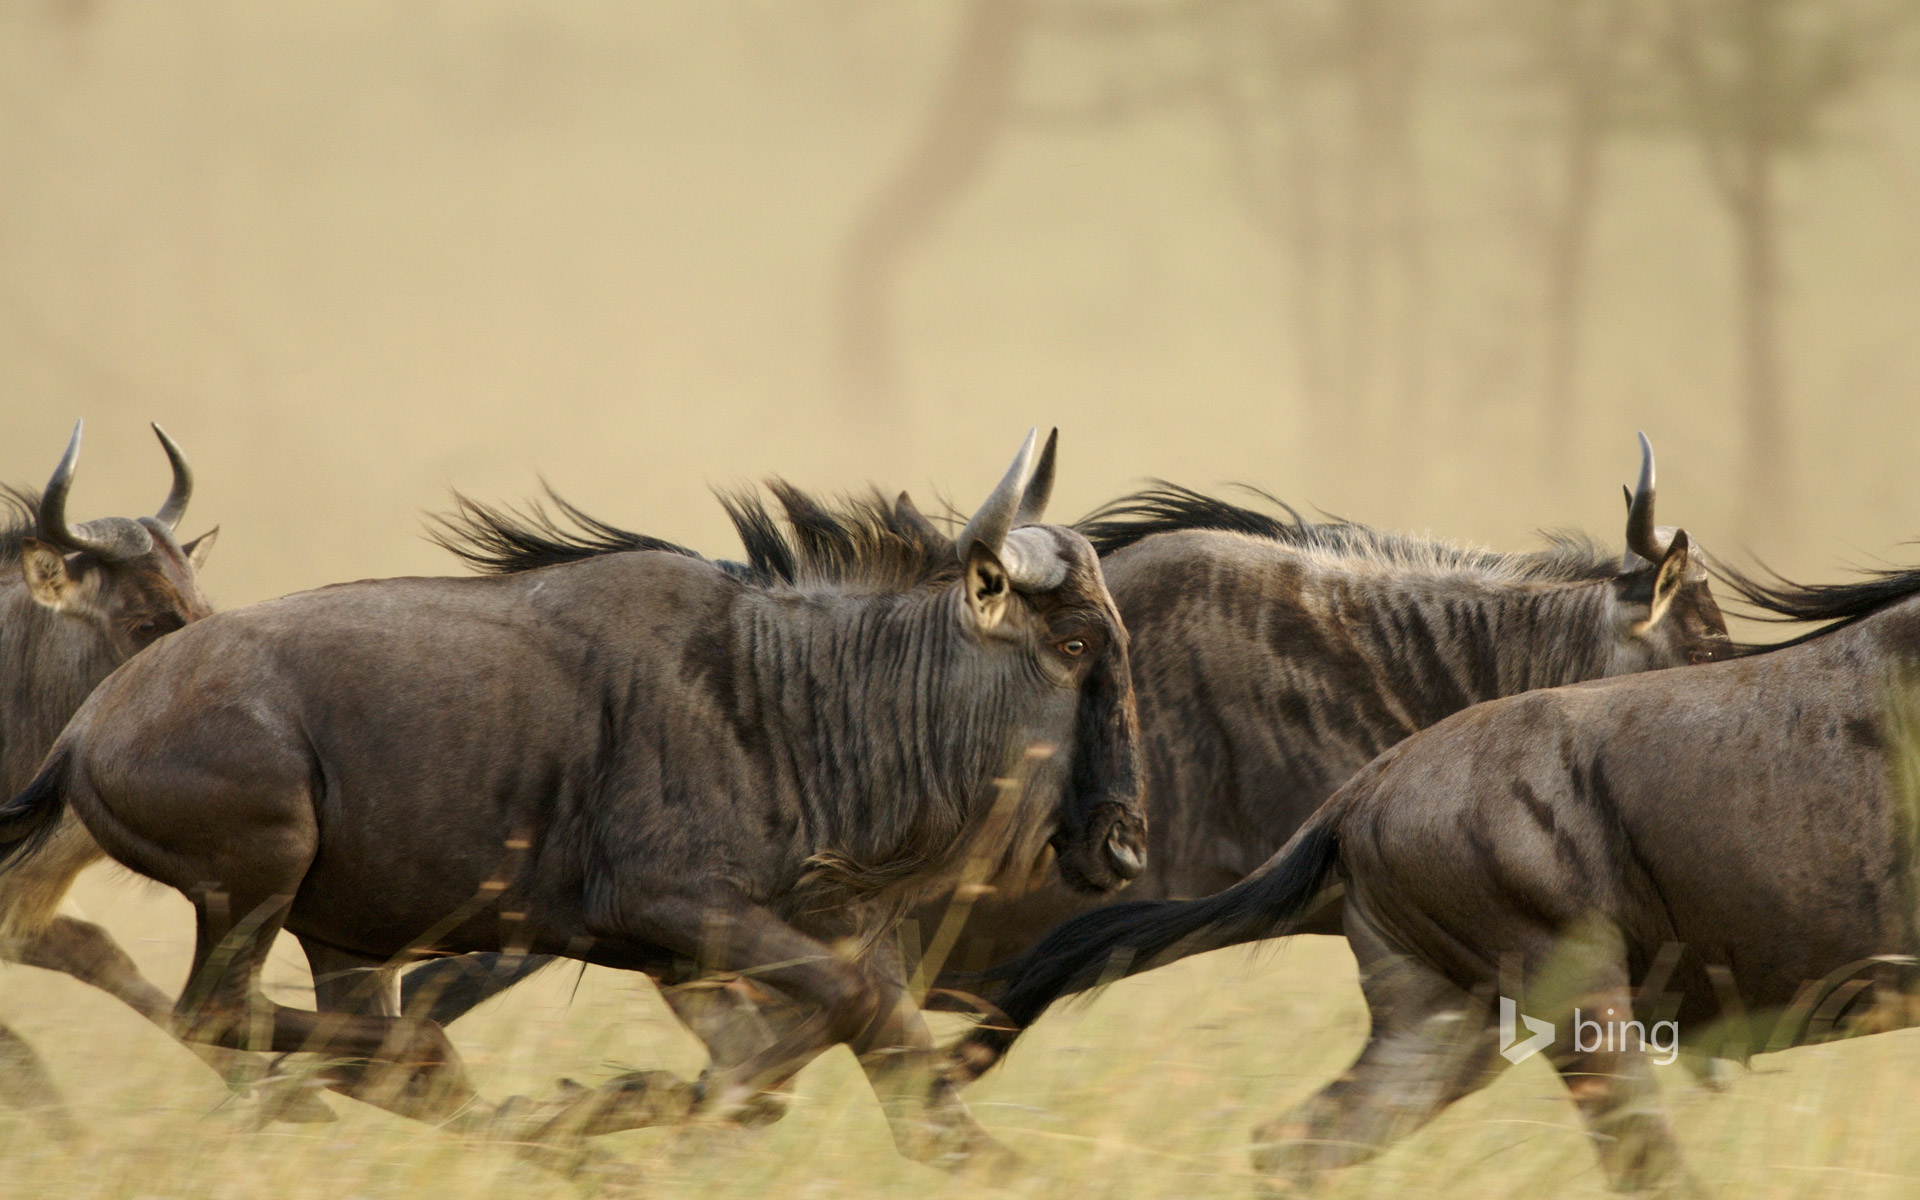 Blue Wildebeests On The Musabi Plains In Serengeti National Park